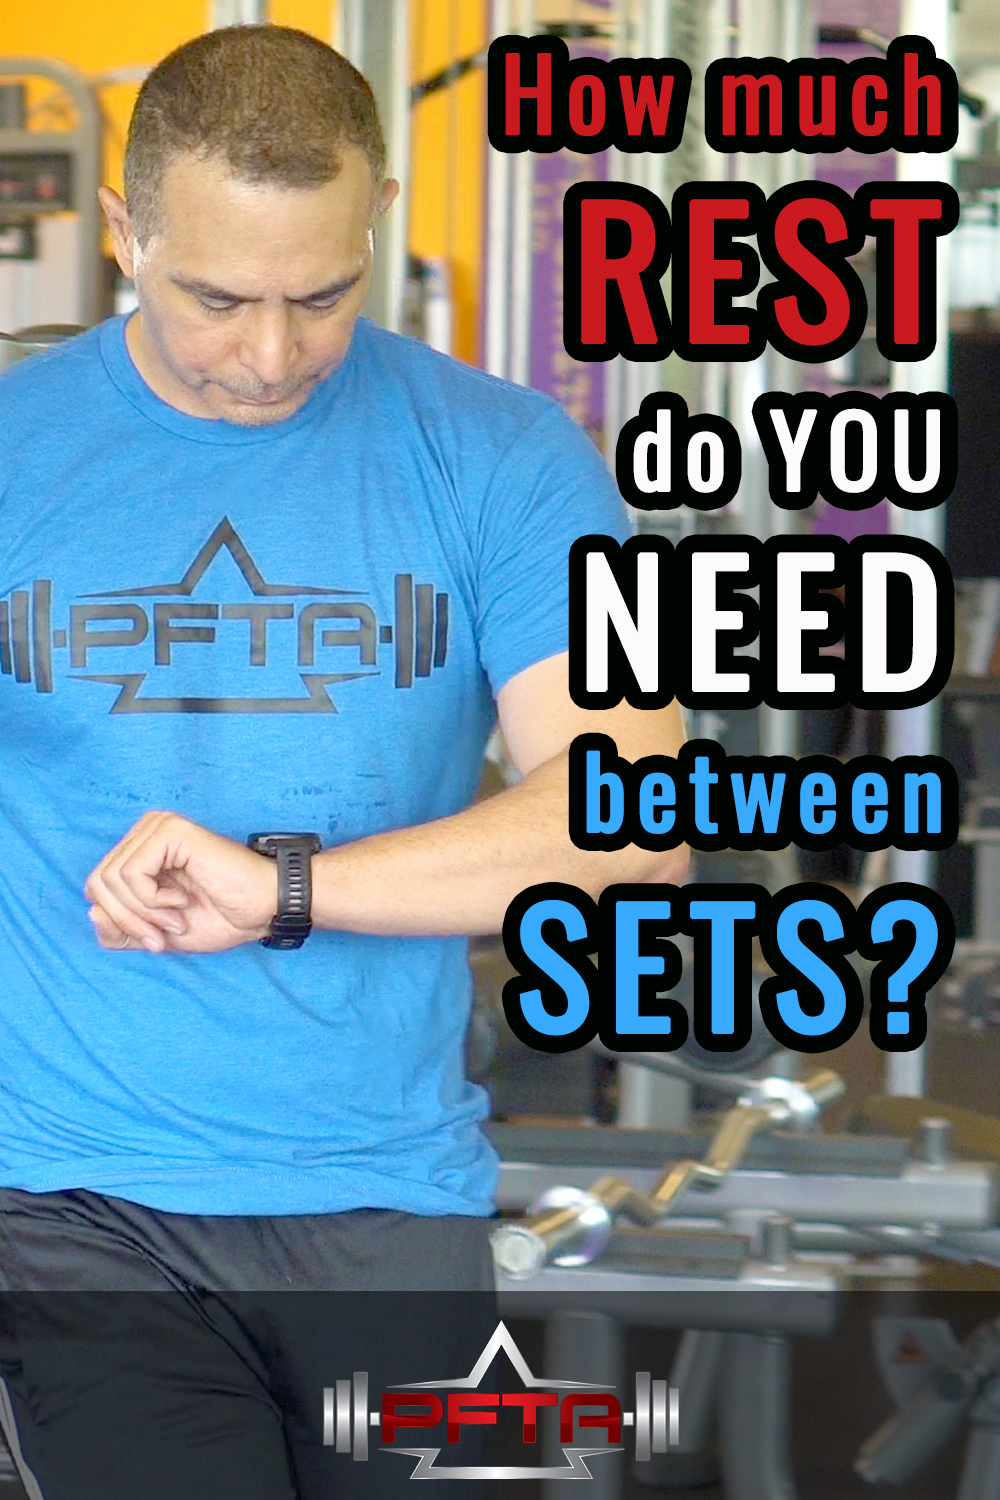 whats a good rest time between sets